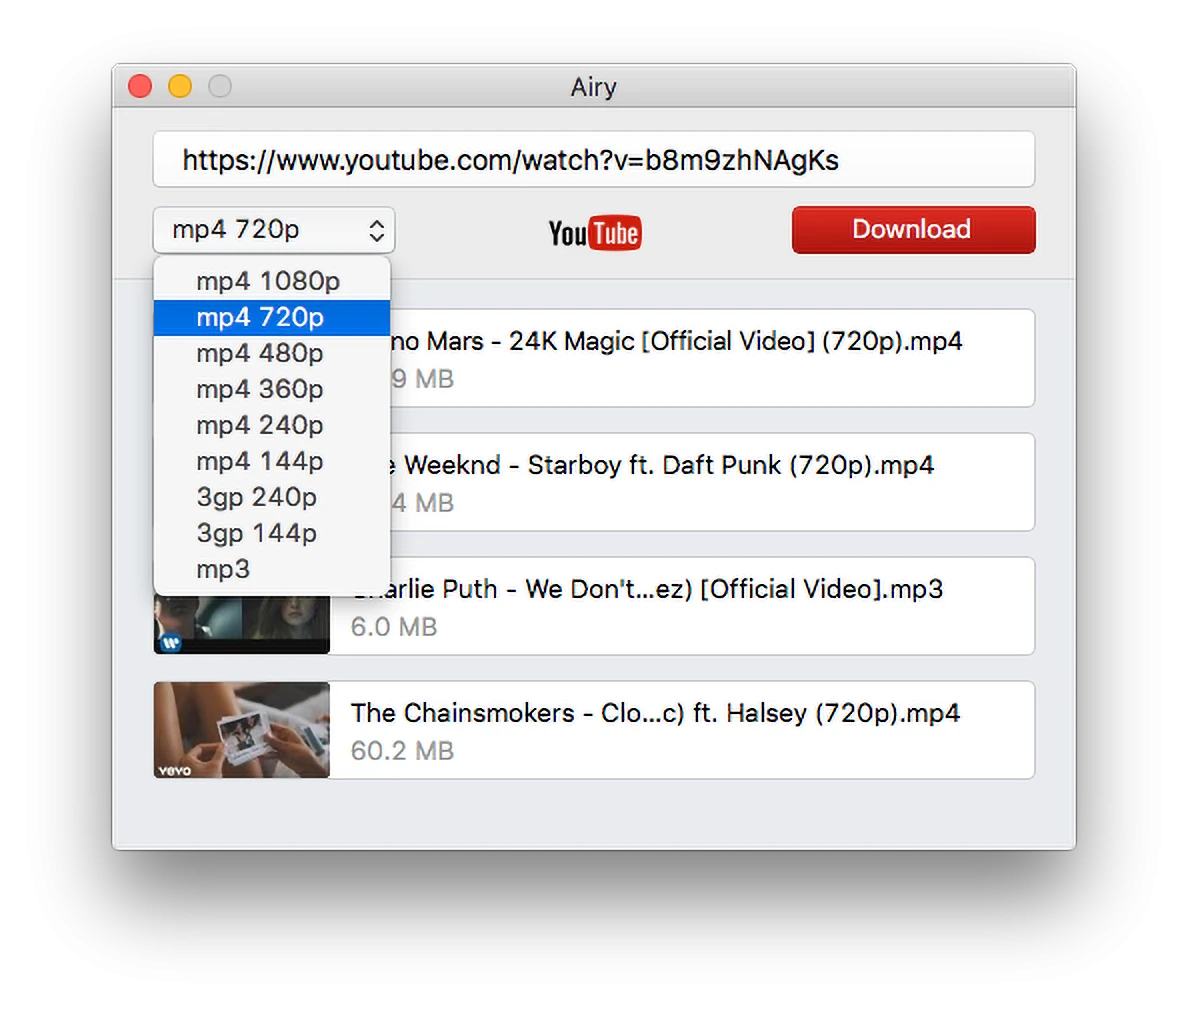 youtube download software for mac free